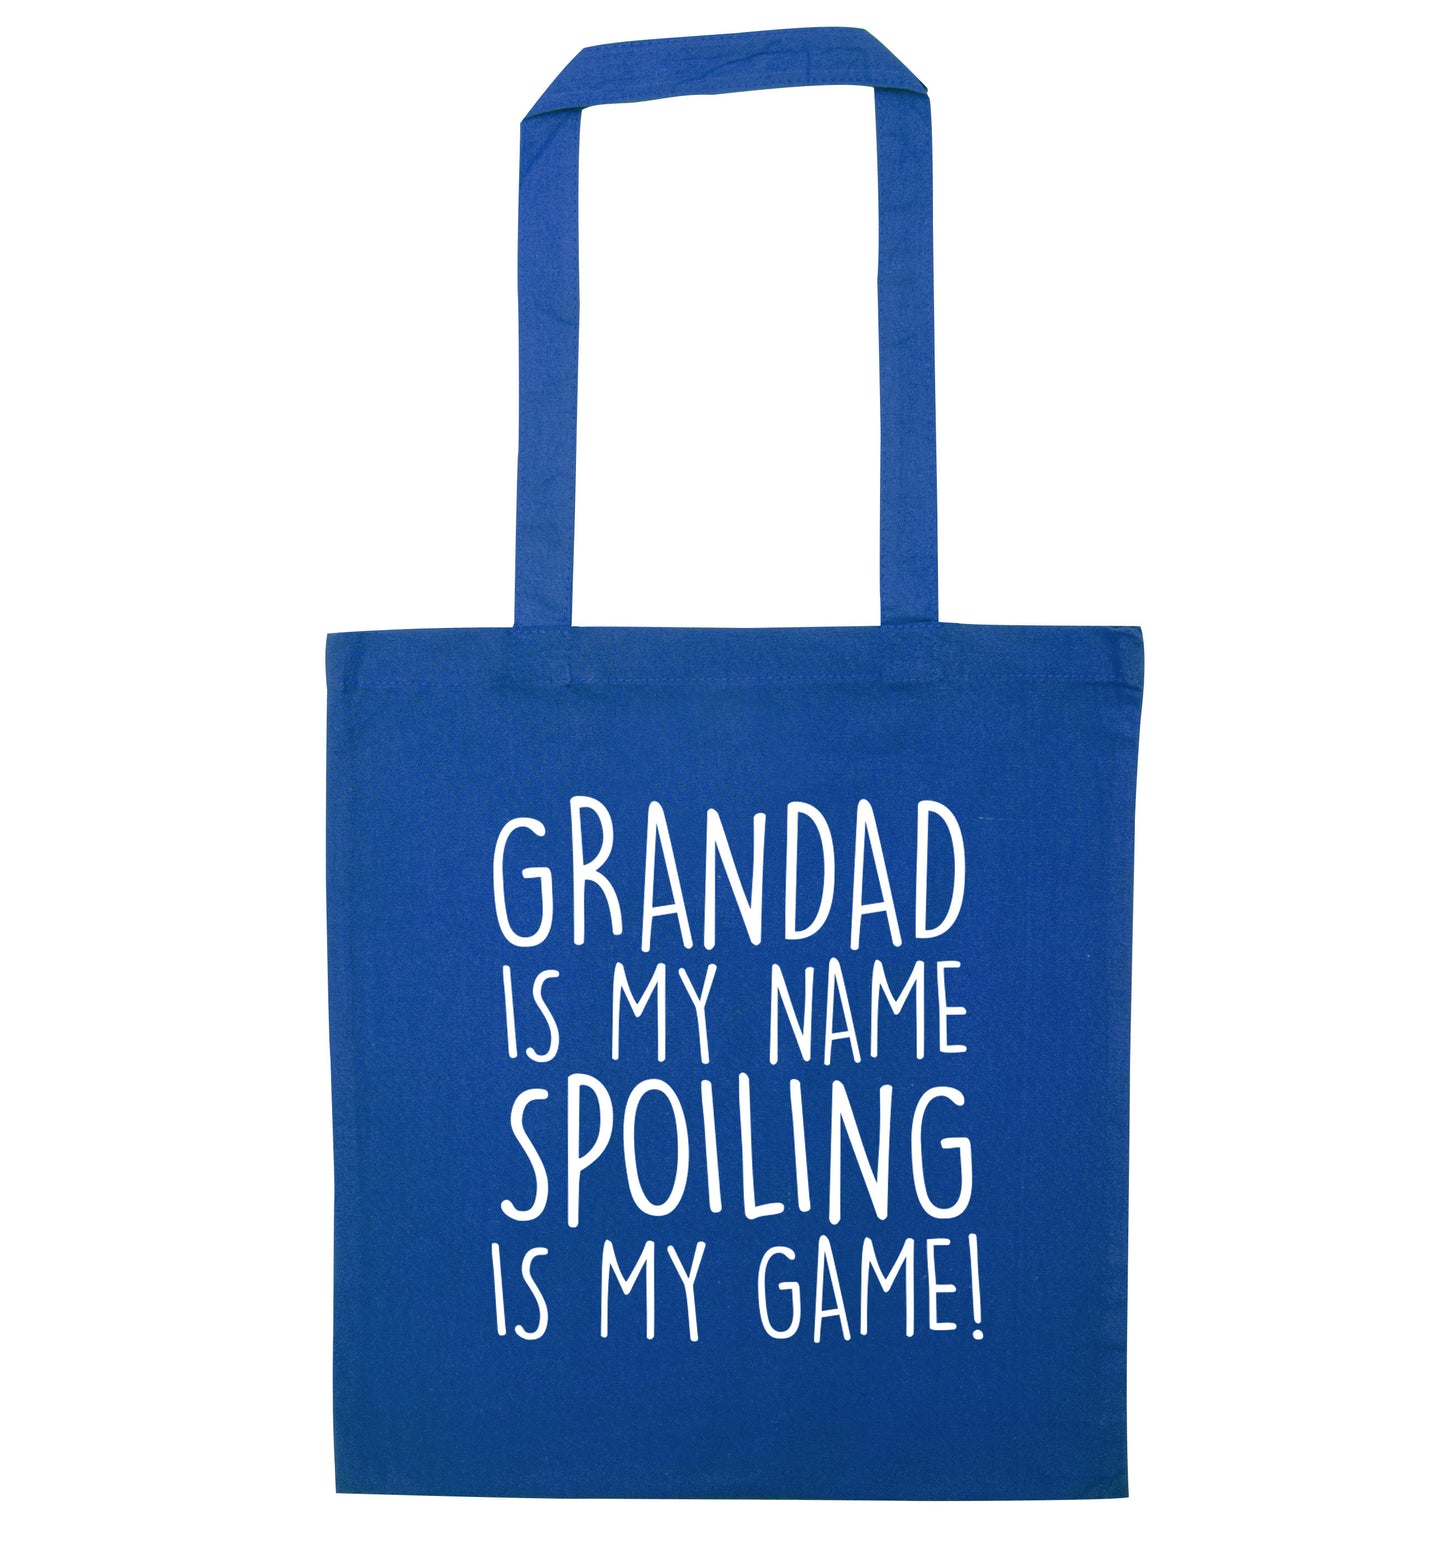 Grandad is my name, spoiling is my game blue tote bag